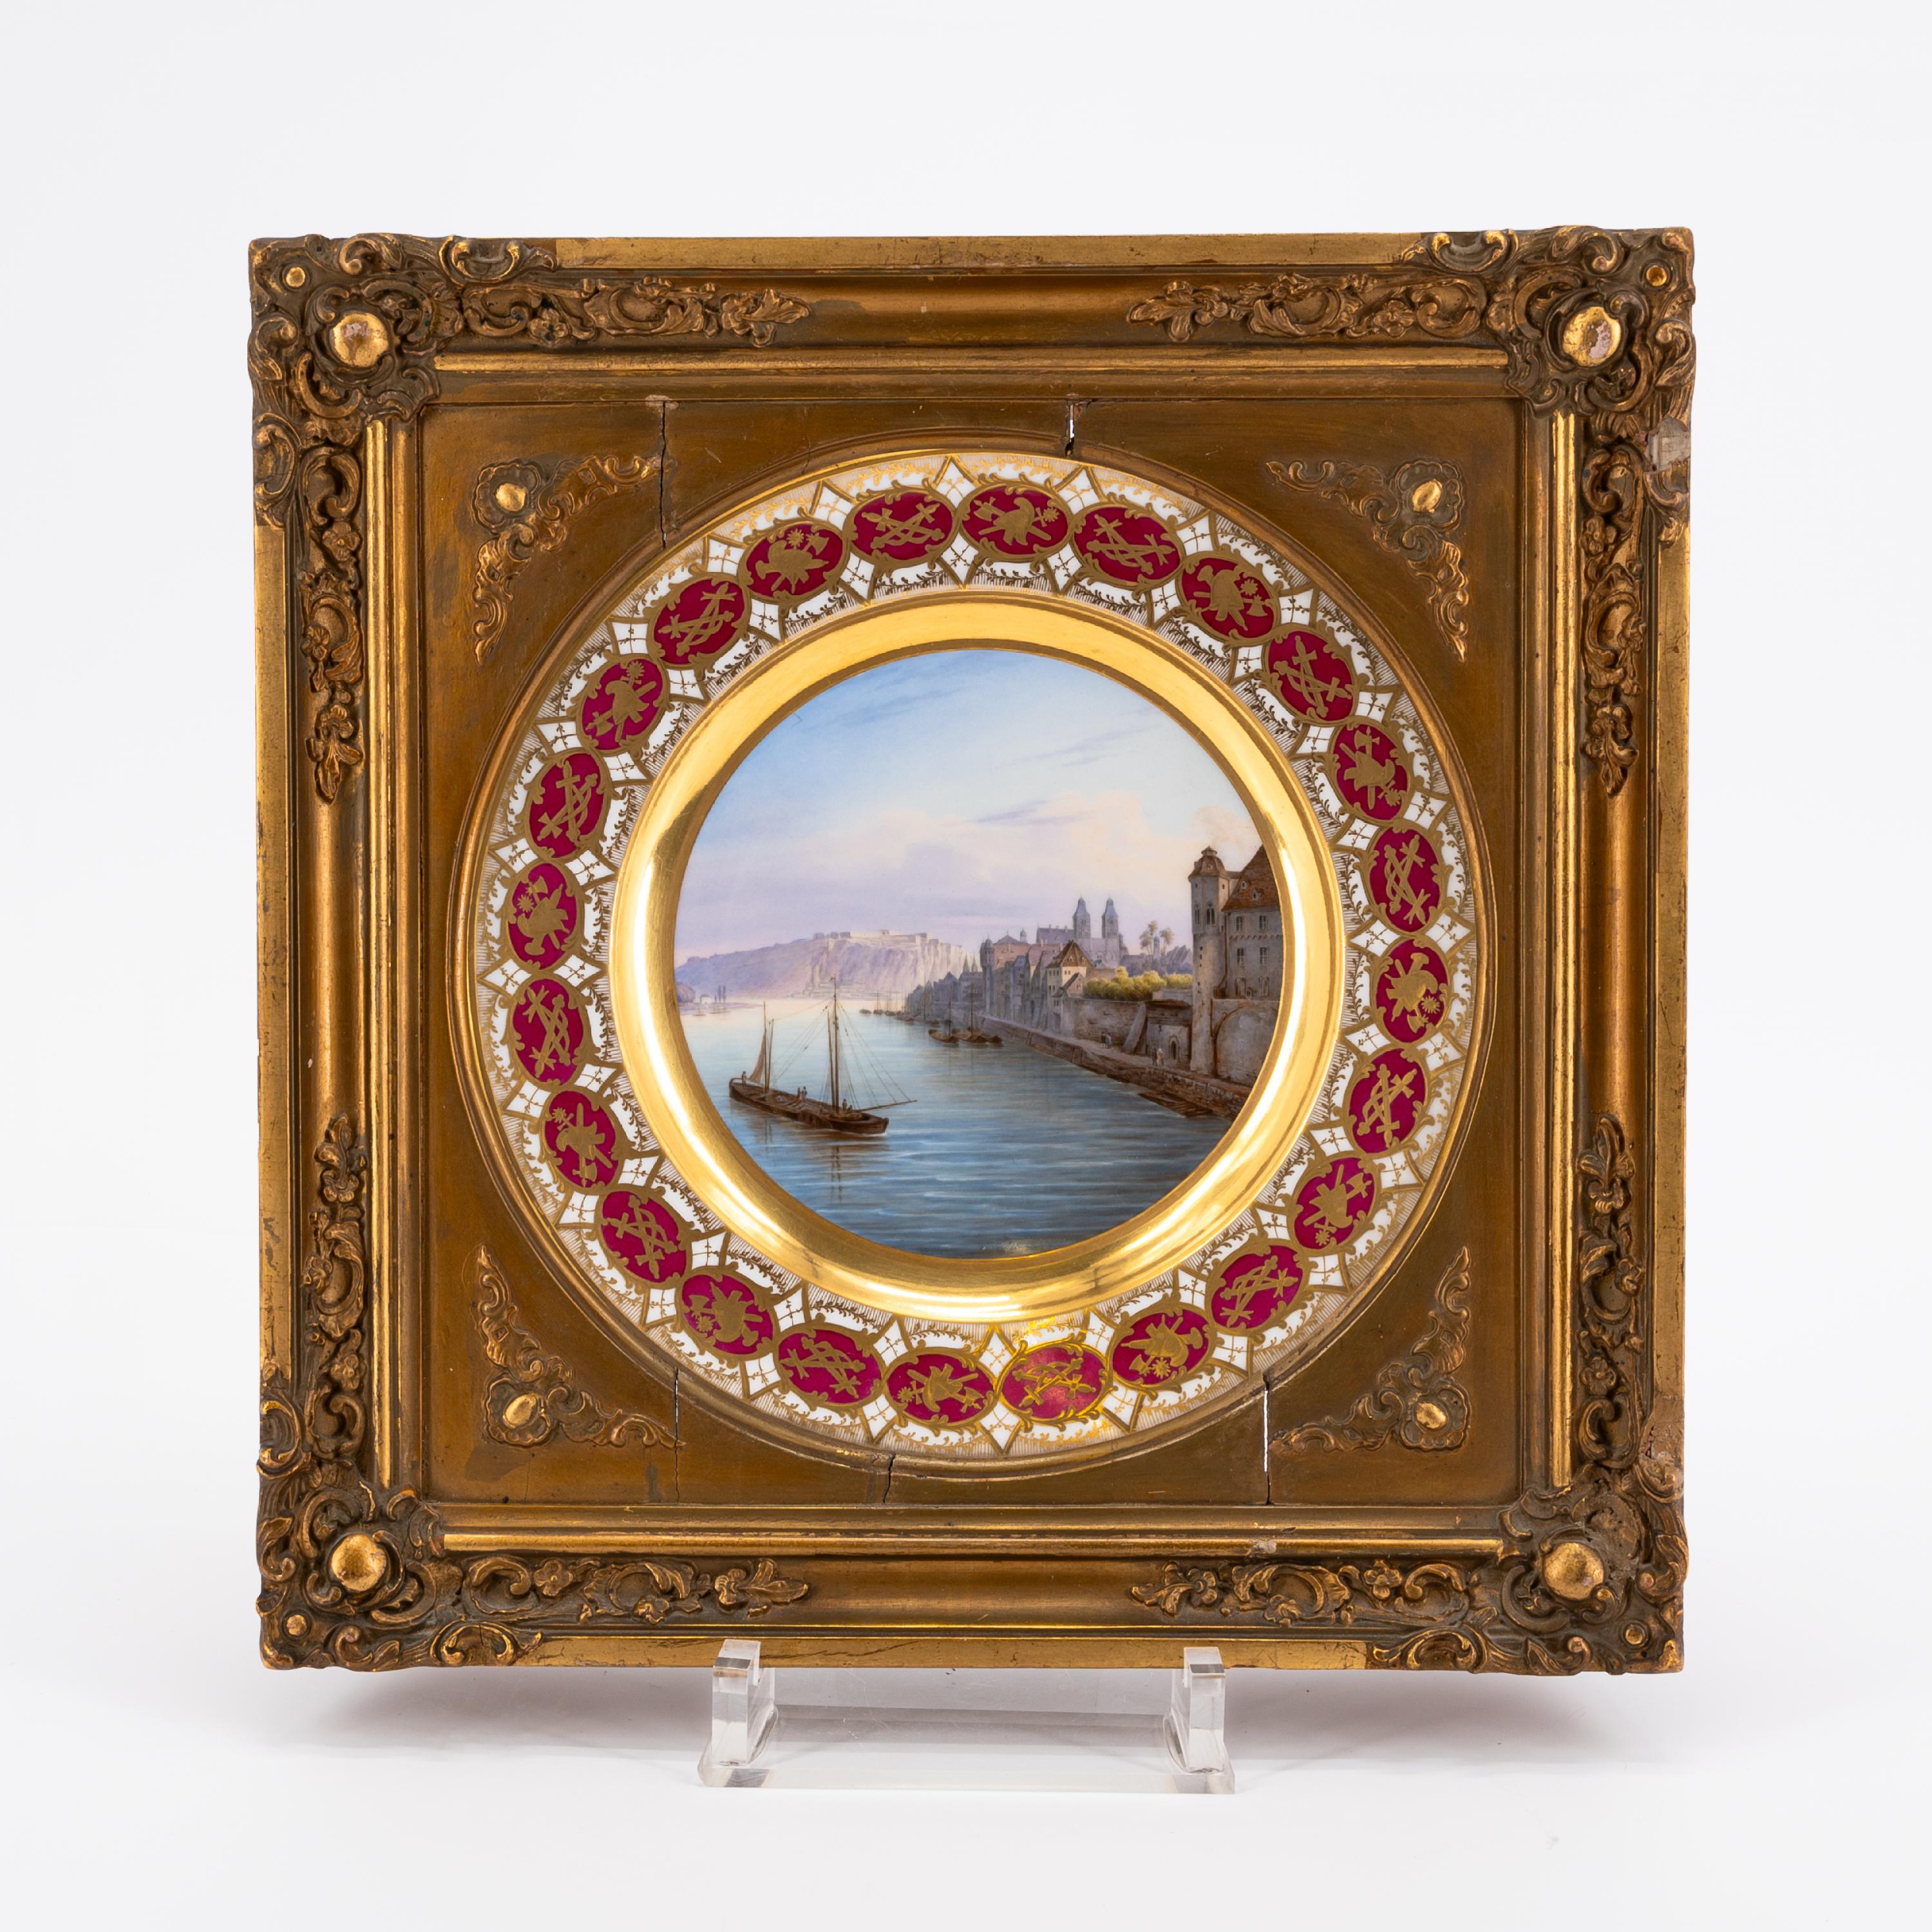 EXEPTIONAL SERIES OF TWELVE PORCELAIN PLATES WITH ROMANTIC VIEWS OF THE RHINE - Image 13 of 26